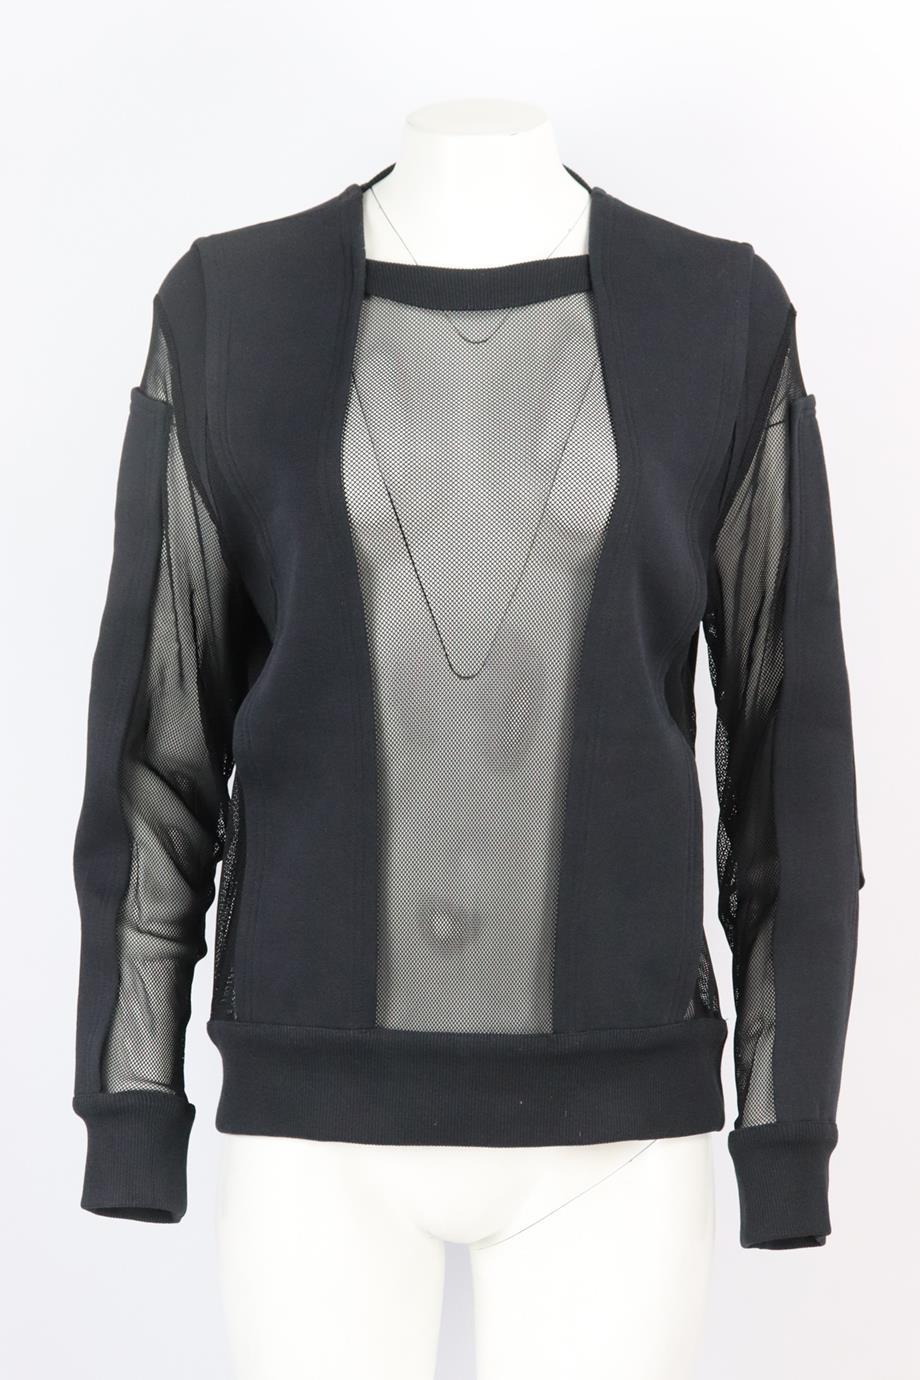 Givenchy mesh paneled cotton sweatshirt. Black. Long sleeve, crewneck. Slips on. Size: Small (UK 8, US 4, FR 36, IT 40). Bust: 41 in. Waist: 38 in. Hips: 36 in. Length: 26.5 in.. Very good condition - Composition label cut out for comfort; see